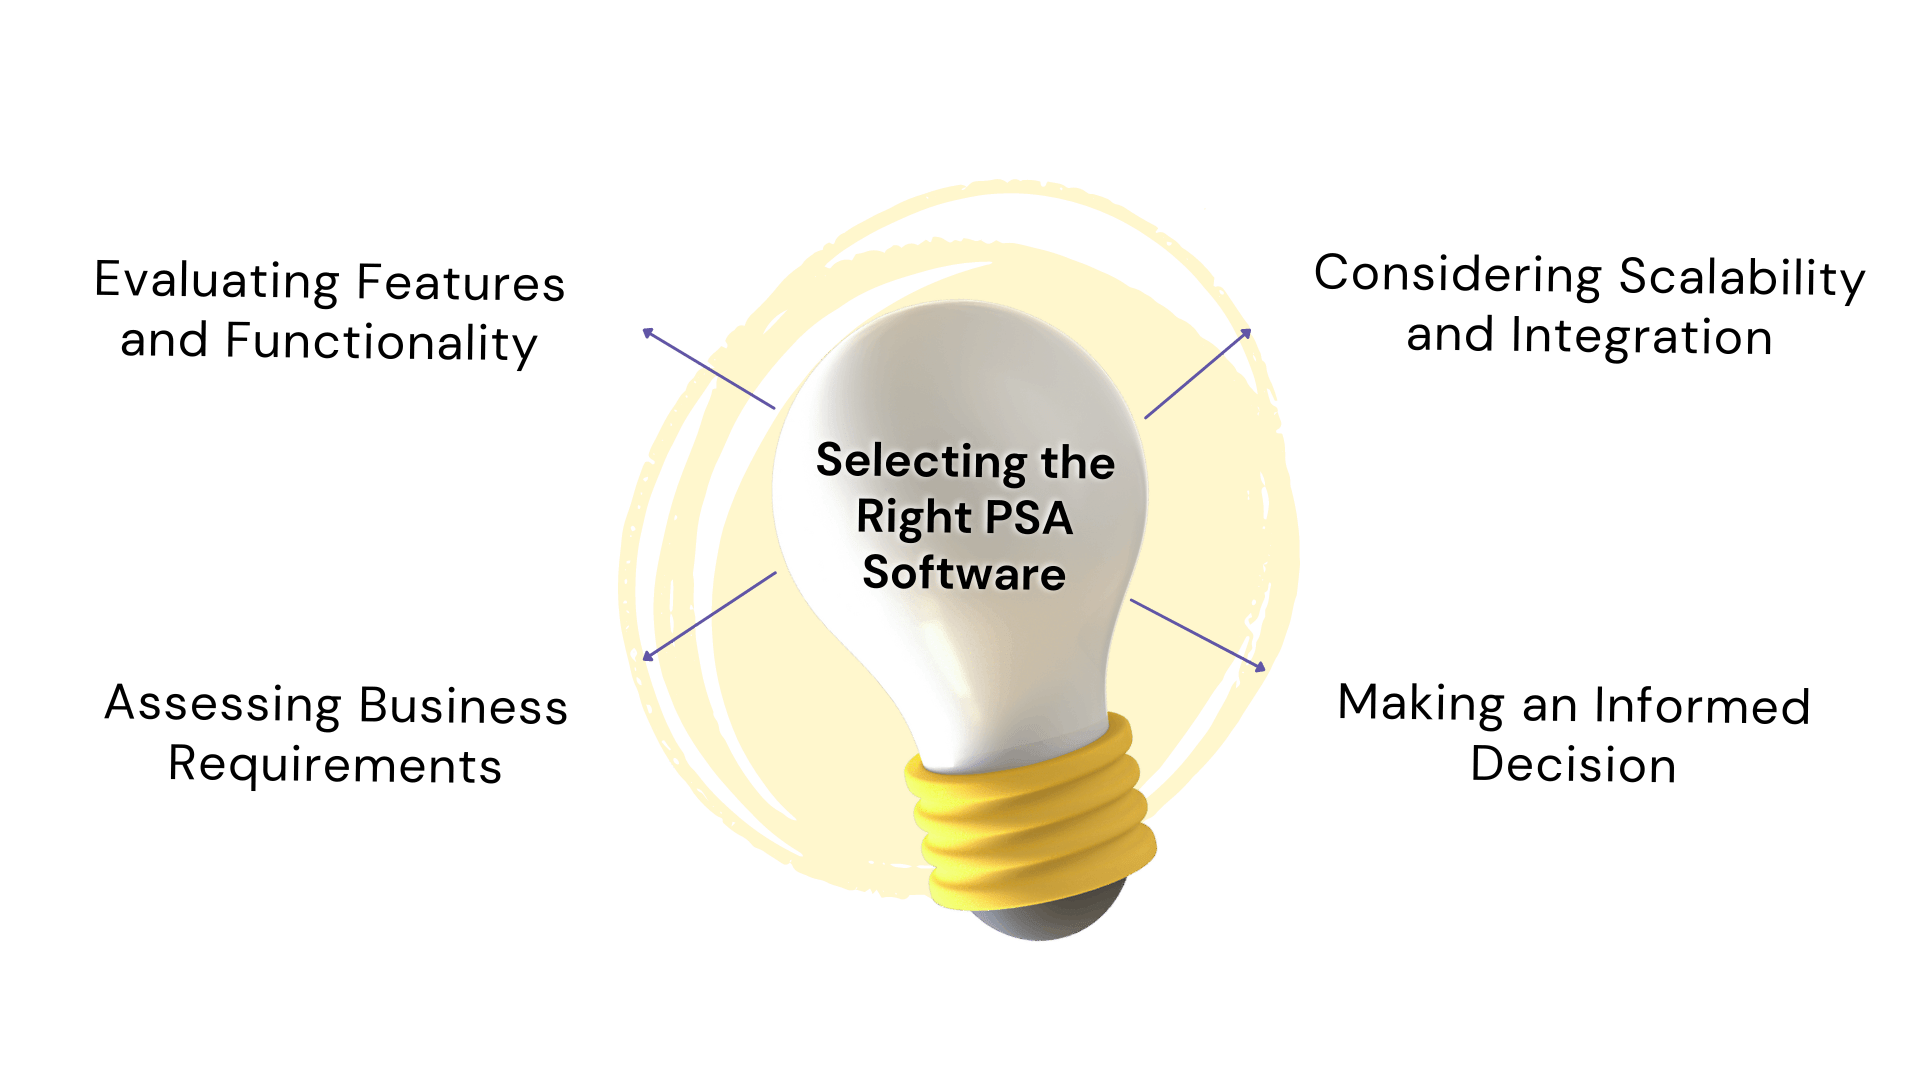 Selecting the Right PSA